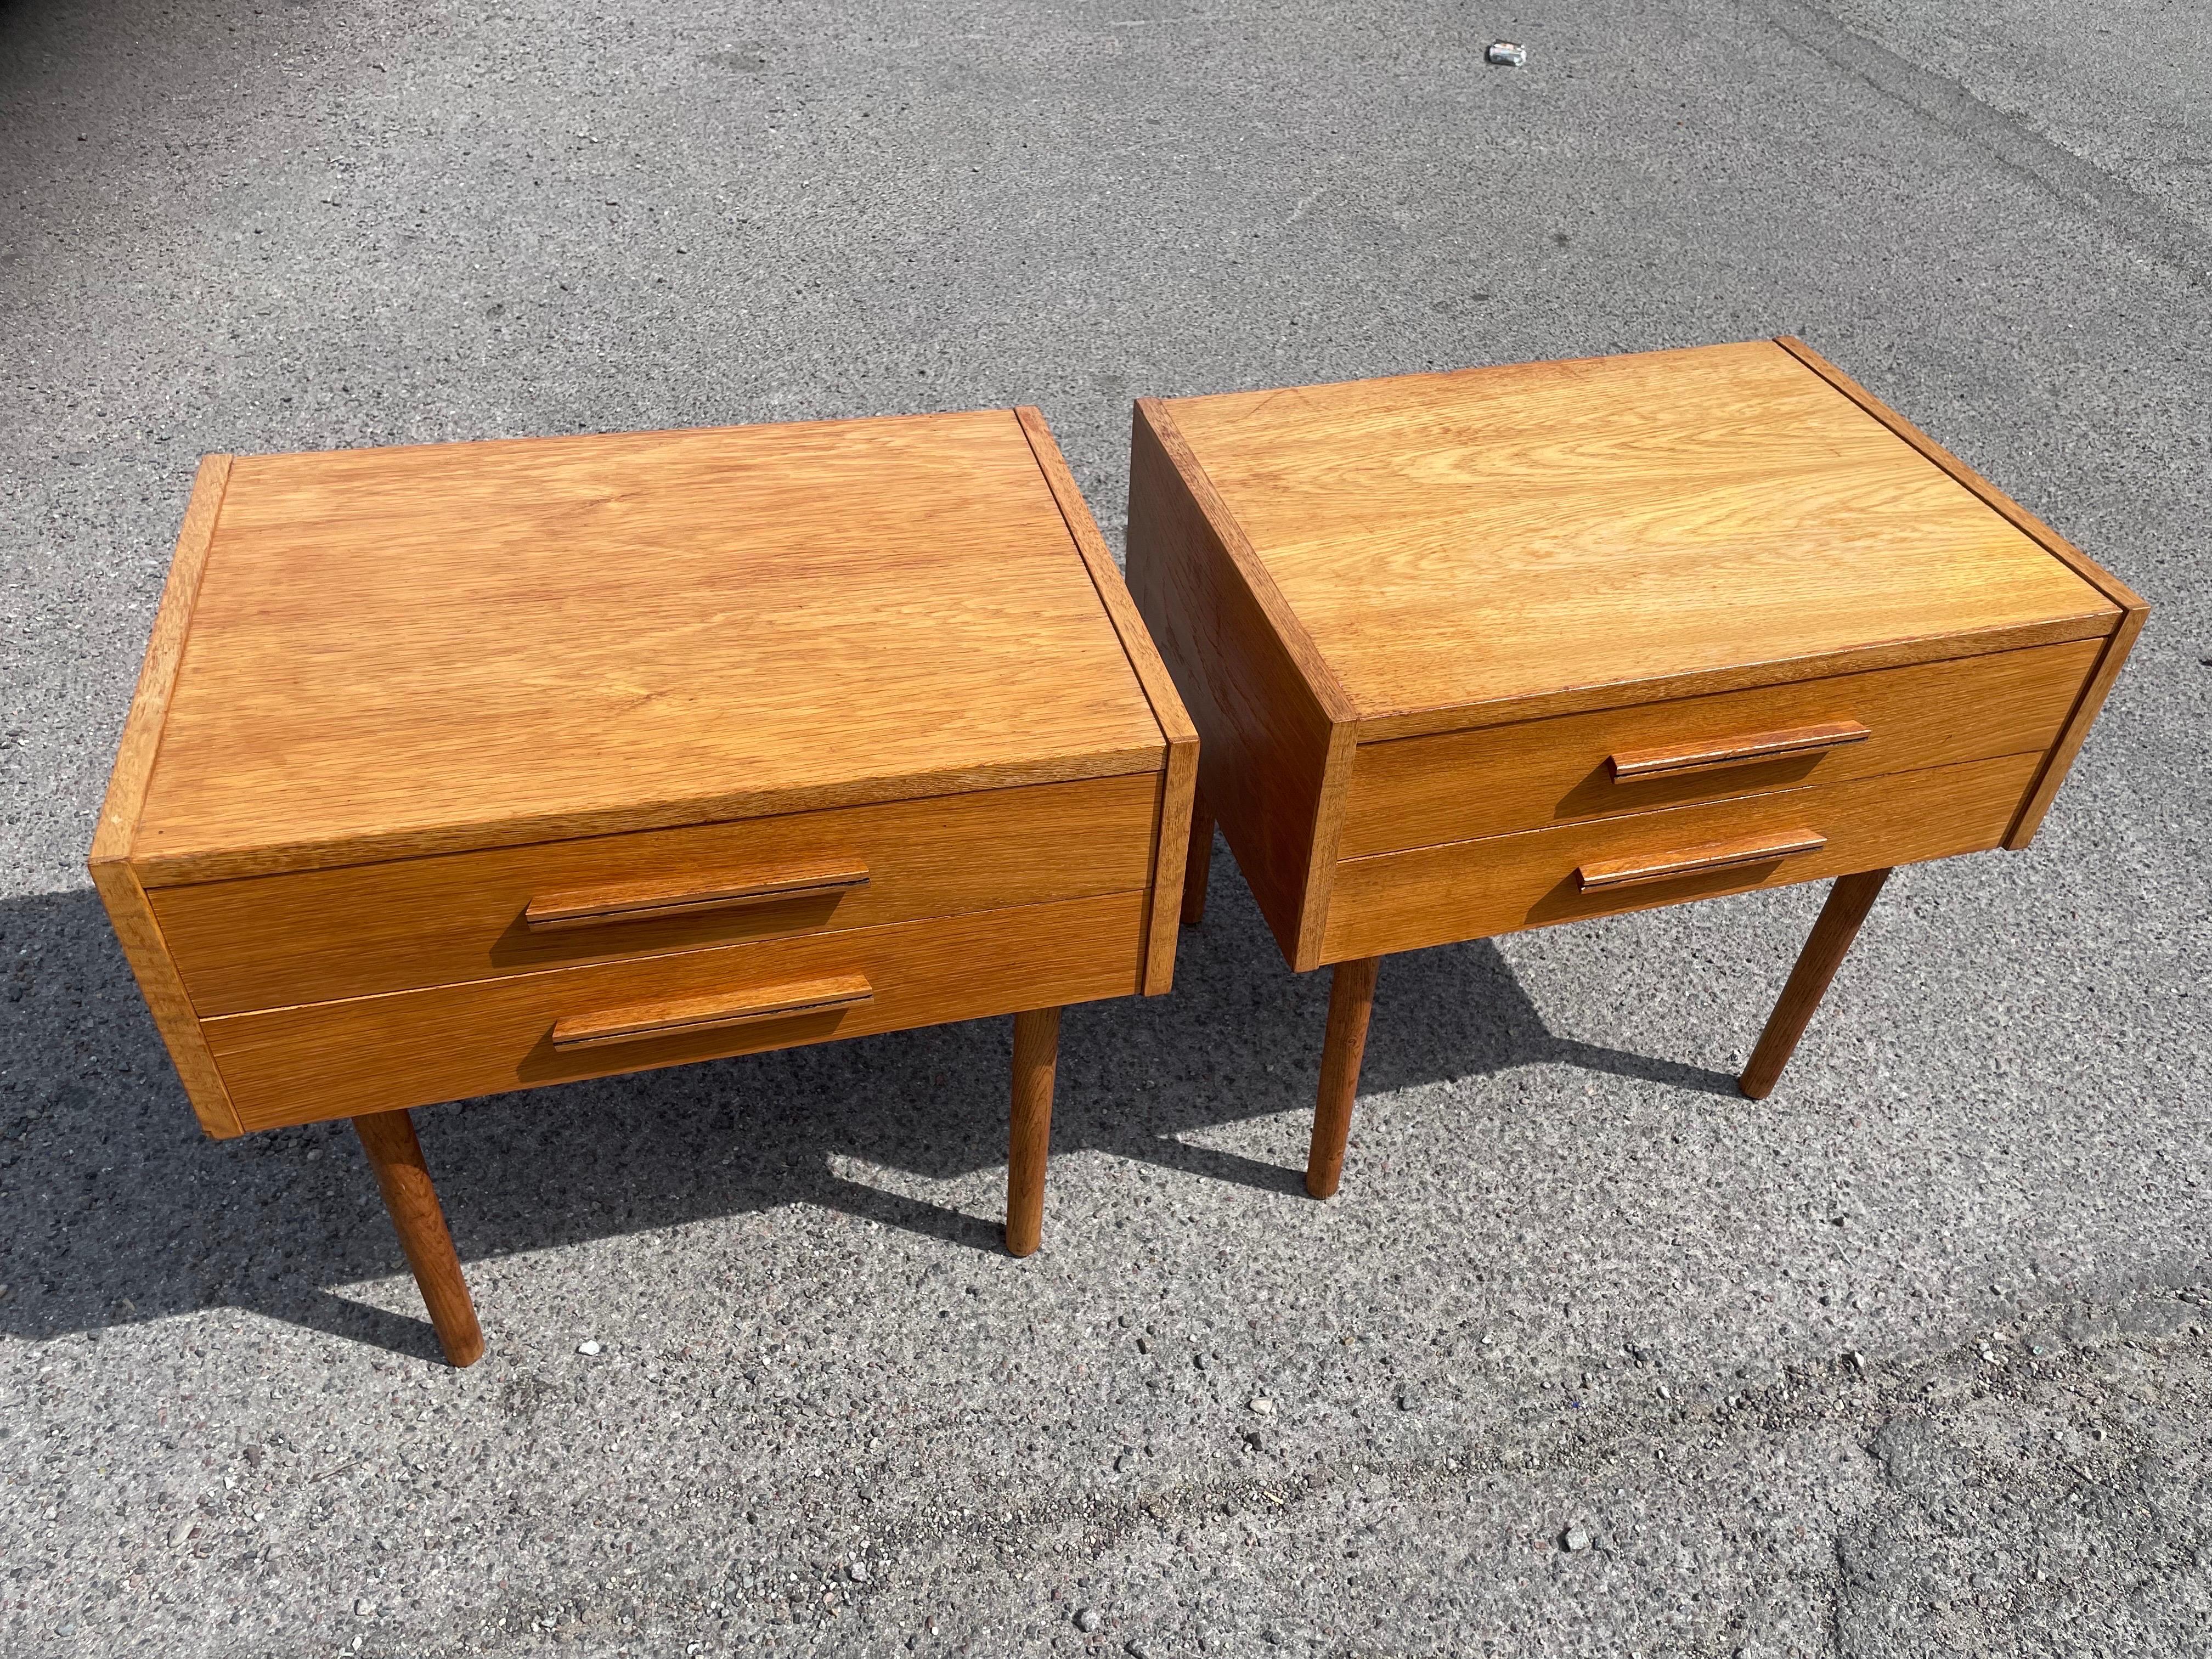 Oak Set of Spacious Danish Mid-Century Modern Nightstands from the 1960s For Sale